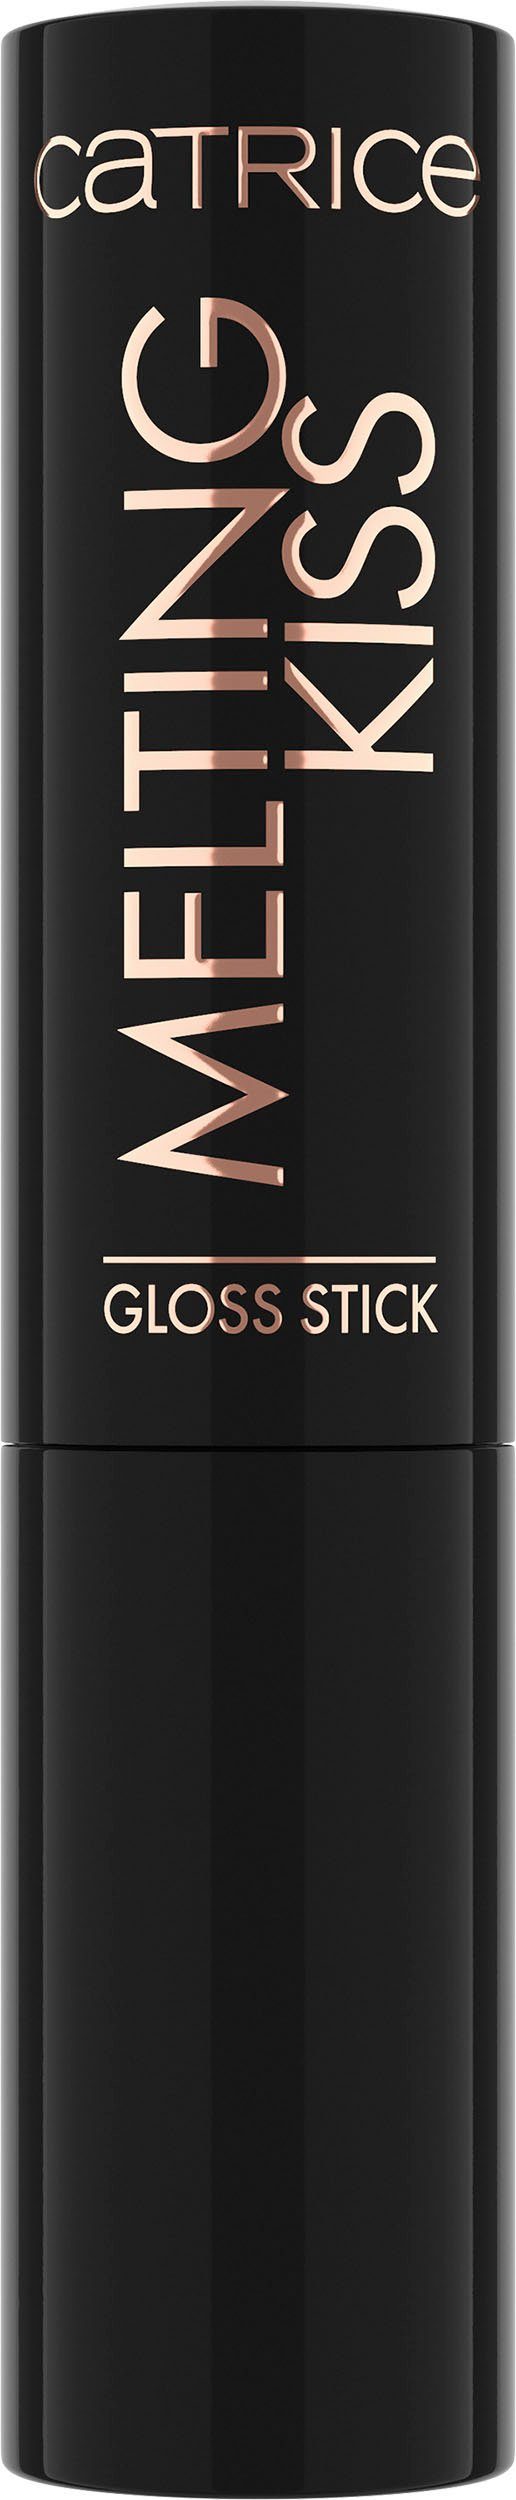 You Stick, Lippenstift Kiss Gloss 3-tlg. Melting Catrice Adore Catrice